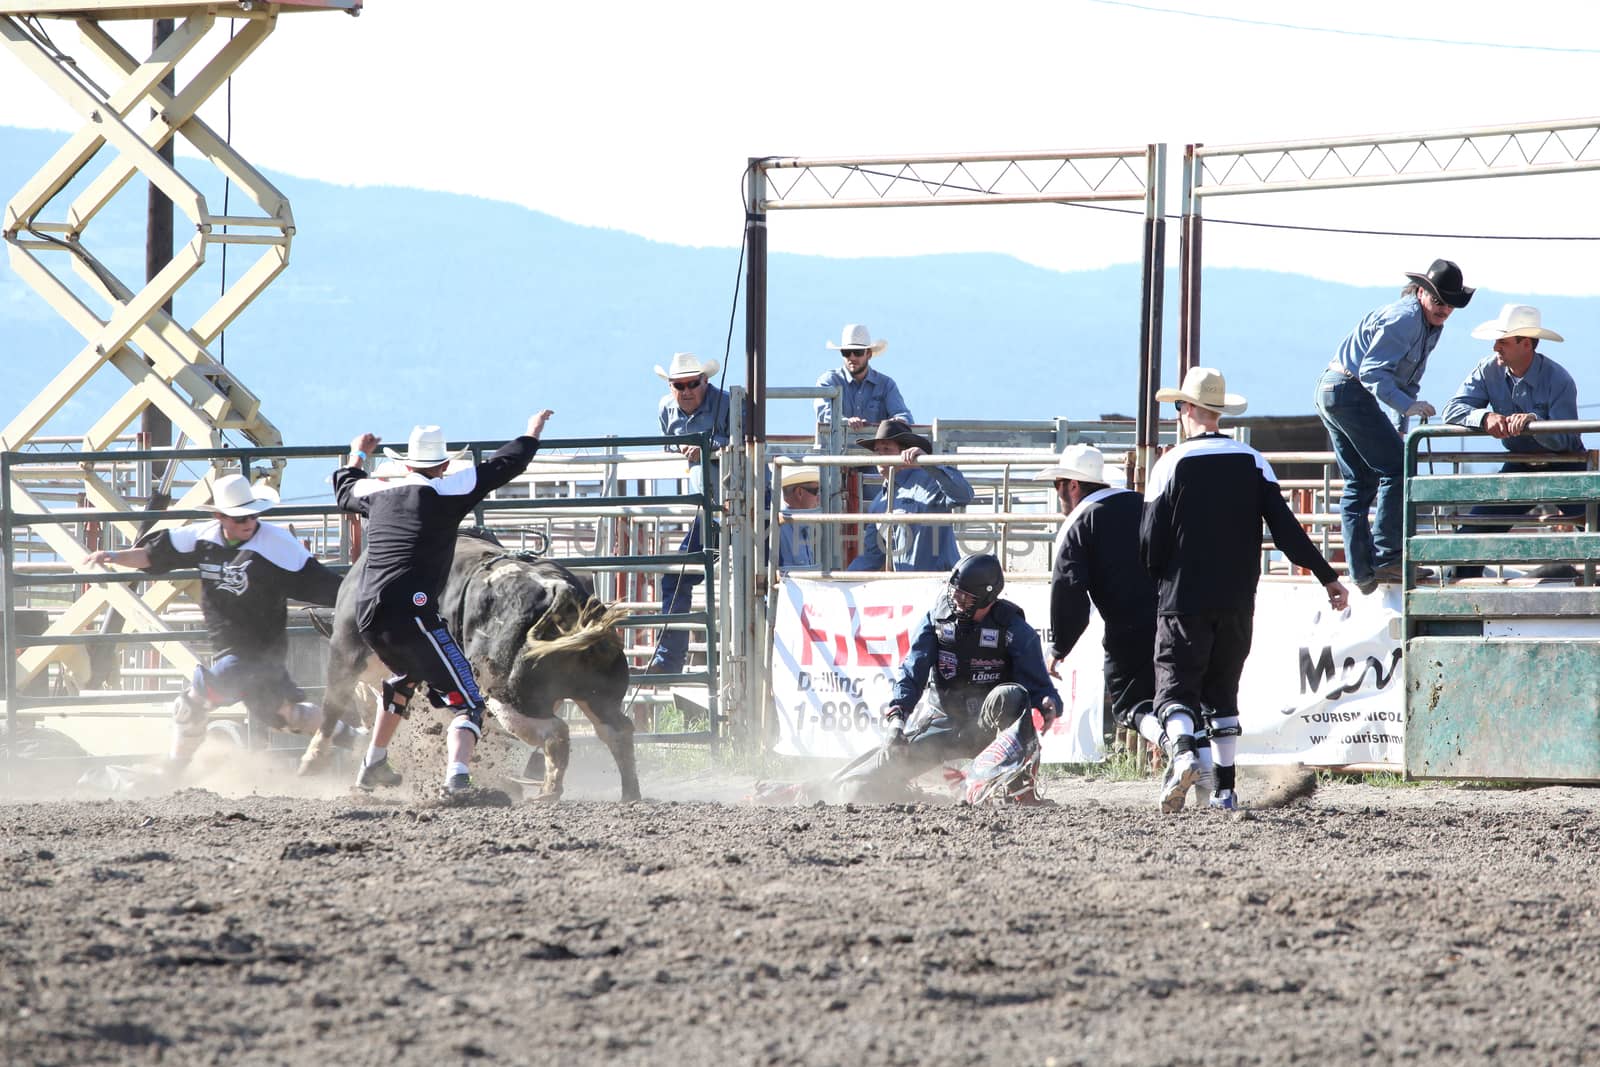 MERRITT, B.C. CANADA - May 30, 2015: Bull rider riding in the first round of The 3rd Annual Ty Pozzobon Invitational PBR Event.